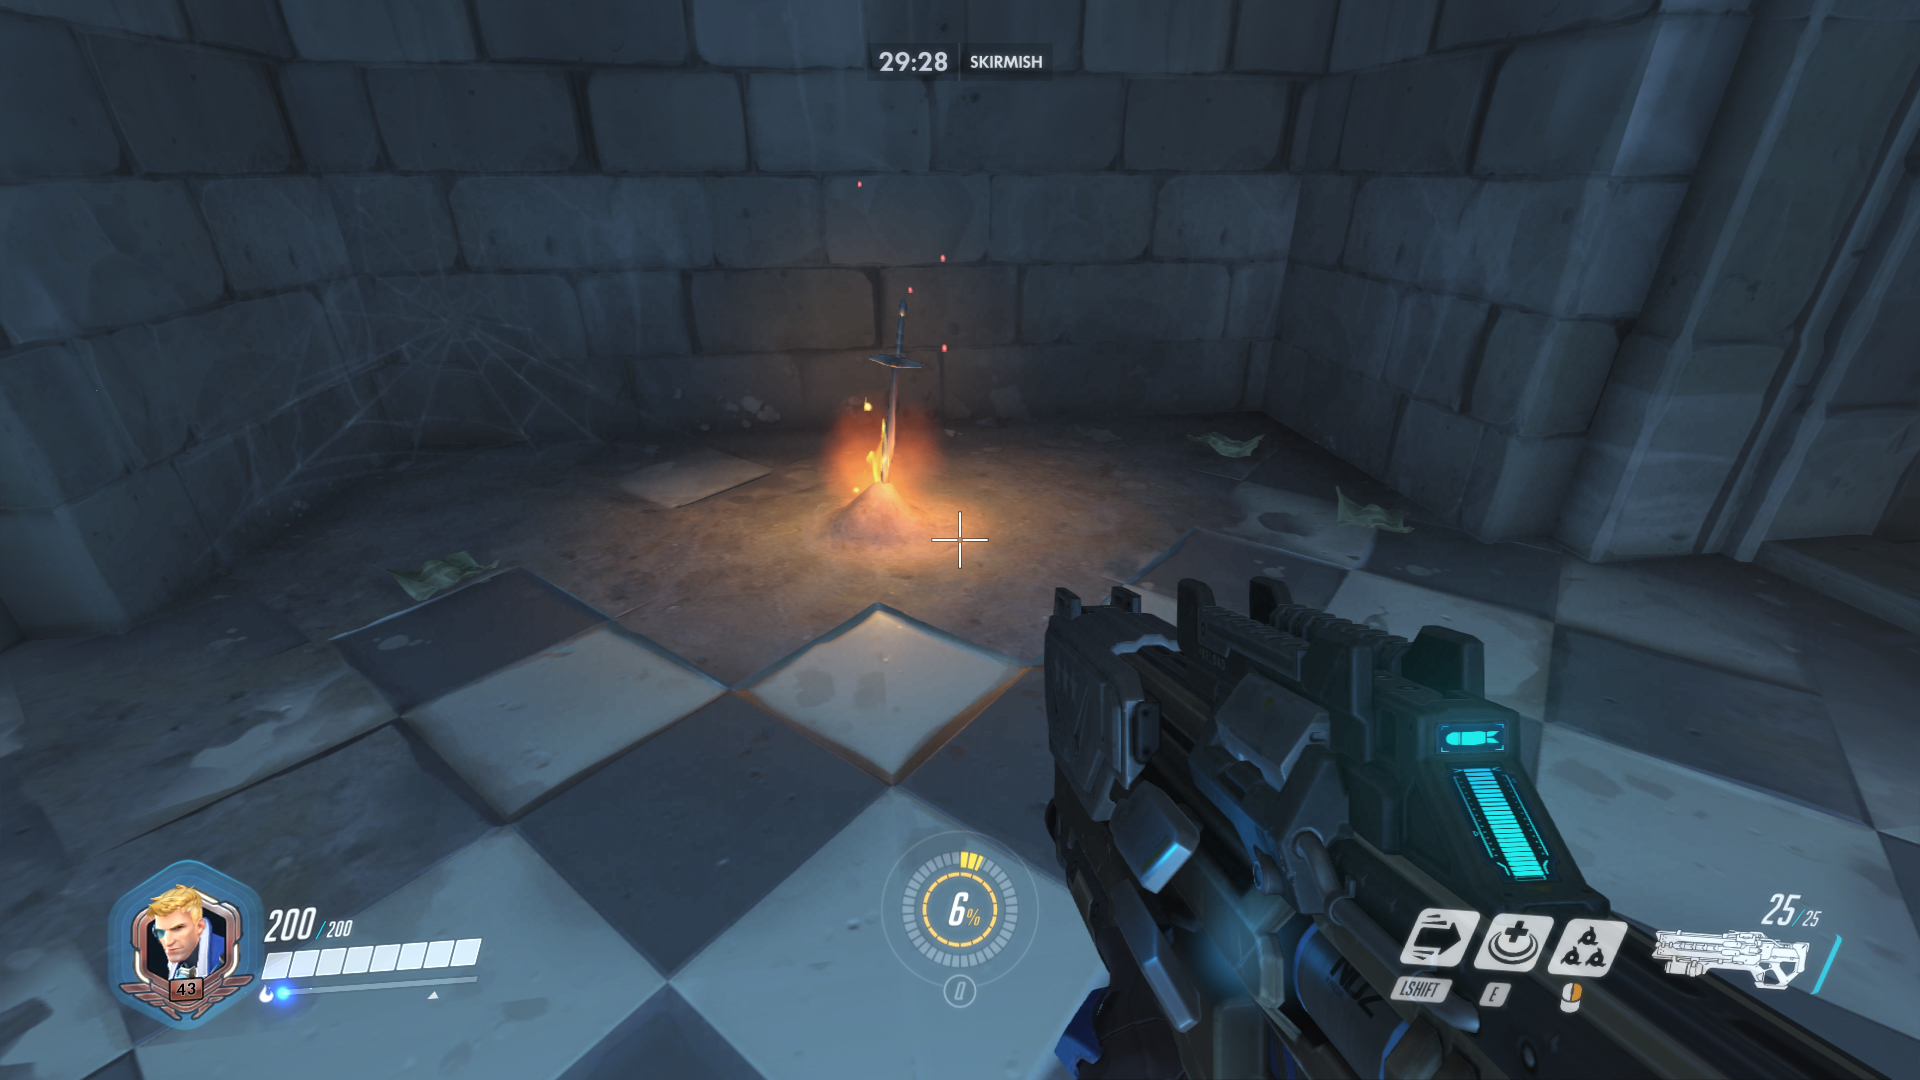 theres-a-cool-dark-souls-easter-egg-in-the-new-overwatch-eichenwalde-map-147188339314 (1)